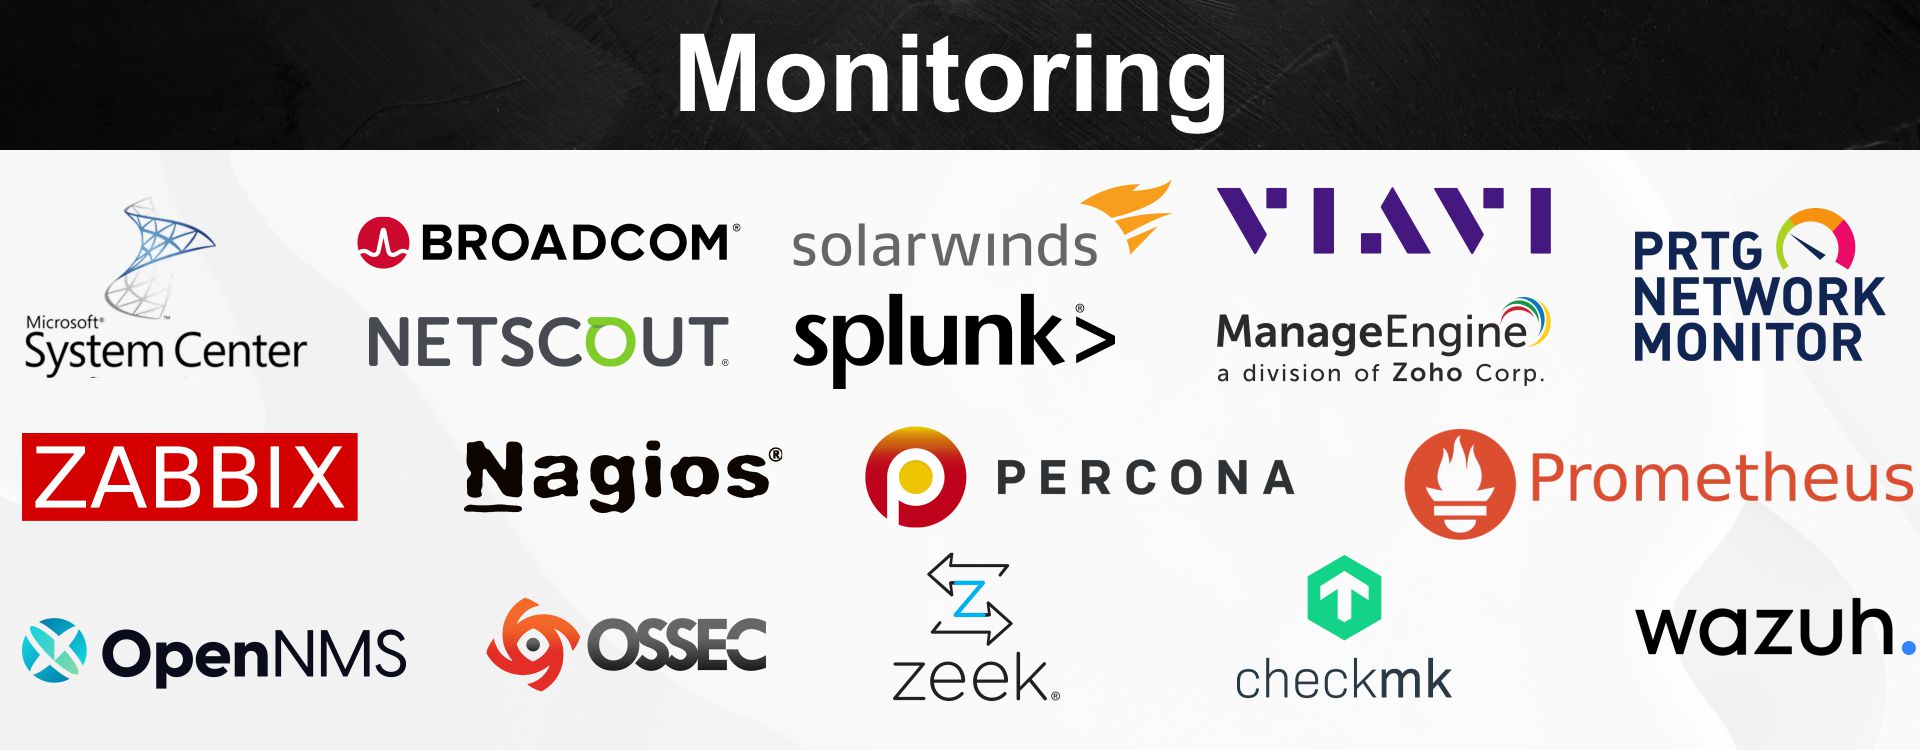 cybersecurity products - monitoring